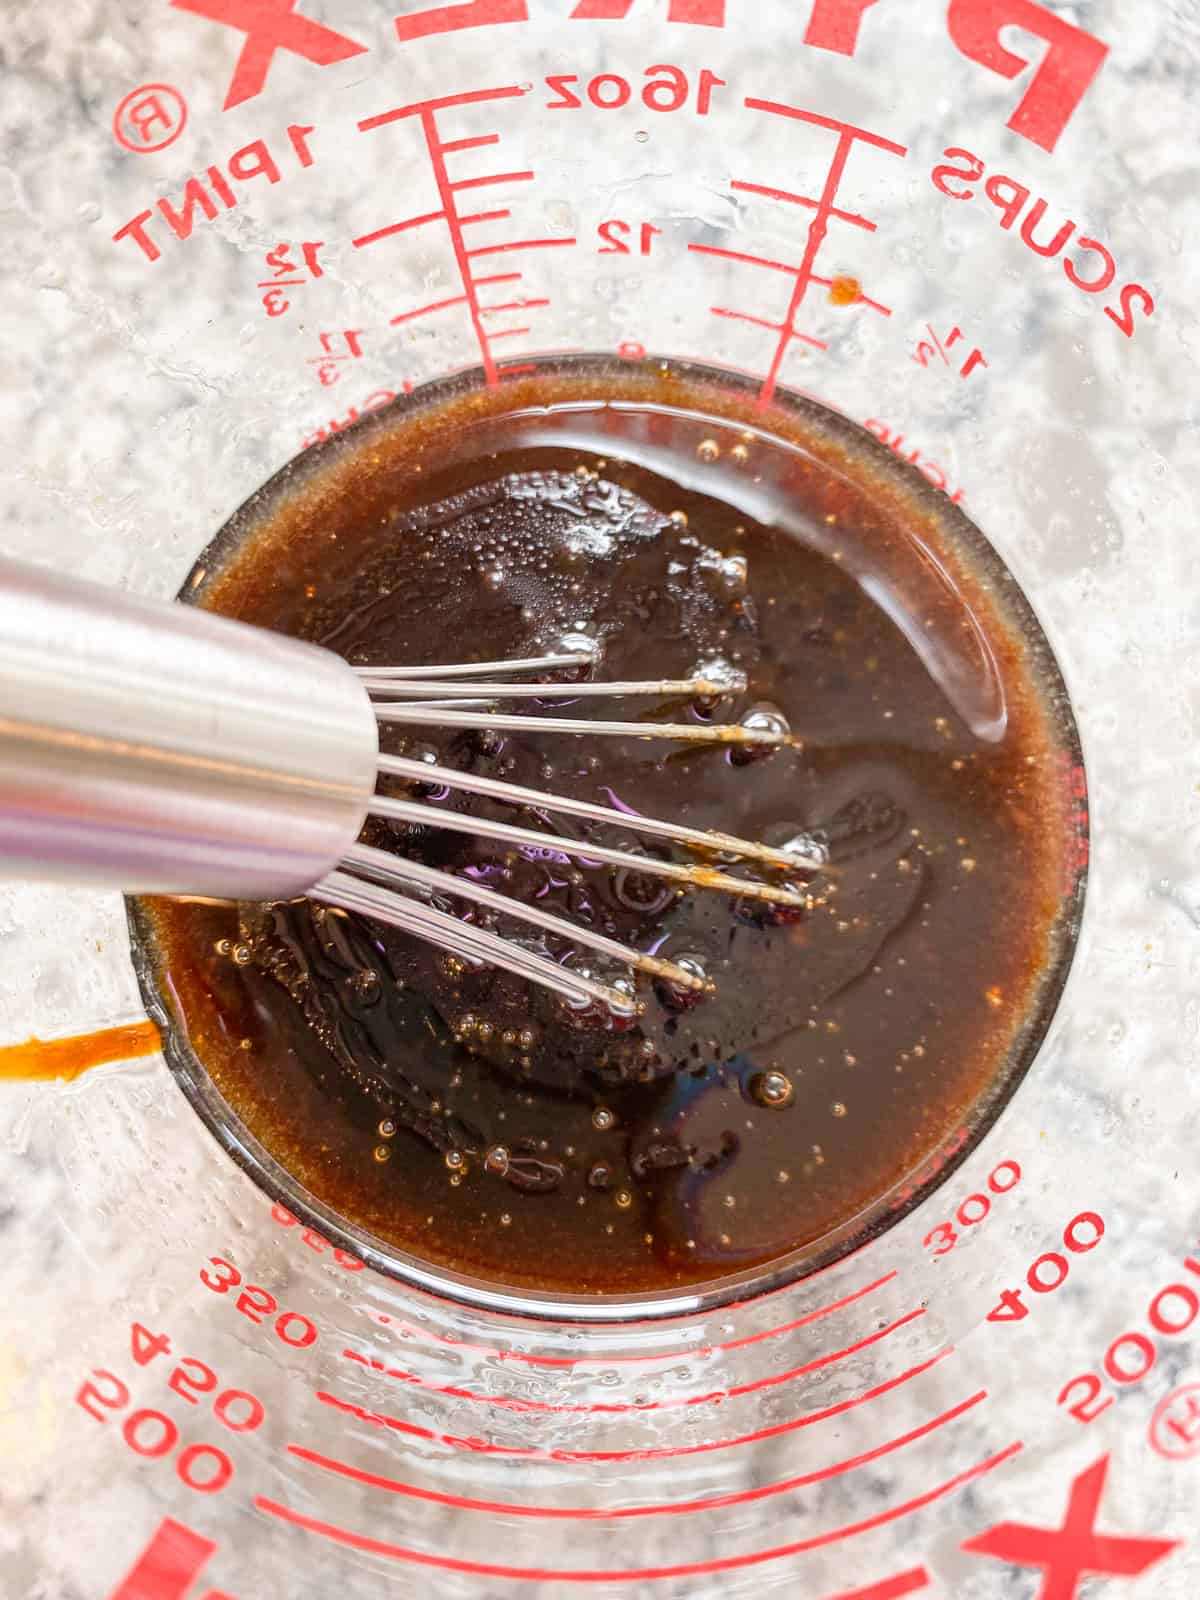 All the wet ingredients mixed together in a glass liquid measuring cup.